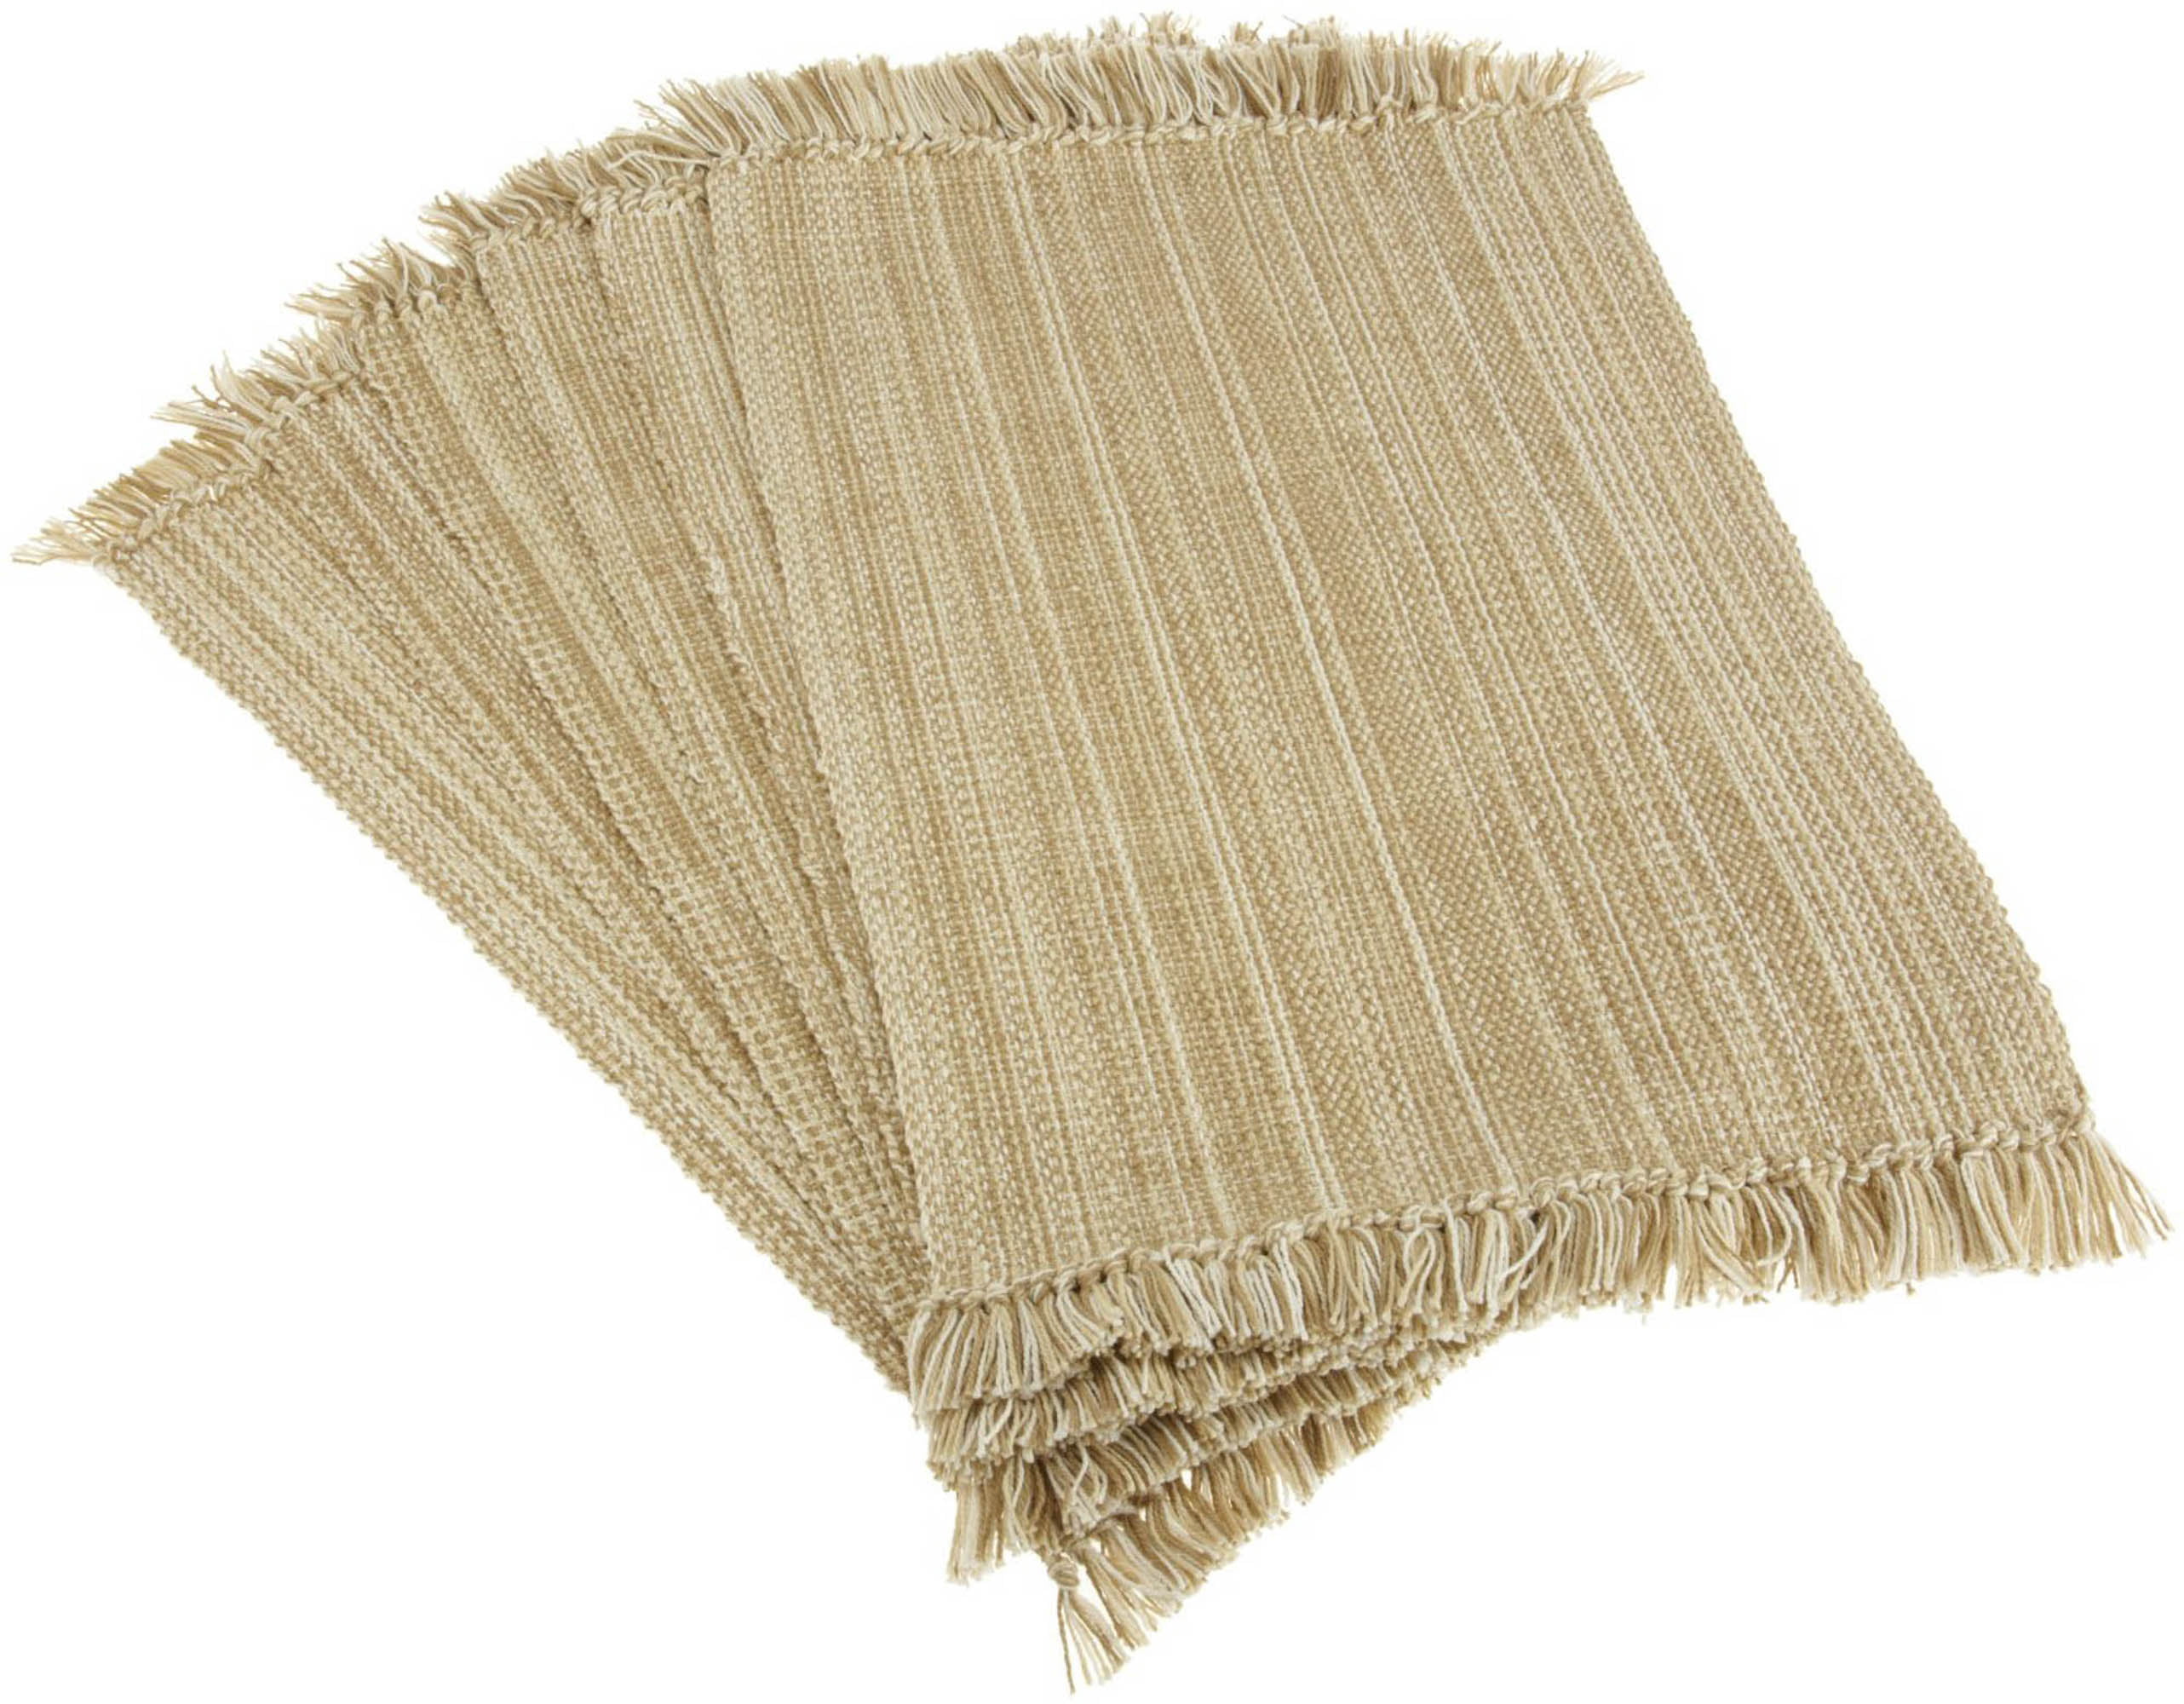 4 Pack Salsa Stripe Hand Knotted Fringe Placemats 13x19 Cotton Craft Hand Woven by Skilled artisans 100% Cotton Natural Light Olive Unique Hand Knotted Decorative Fringe 